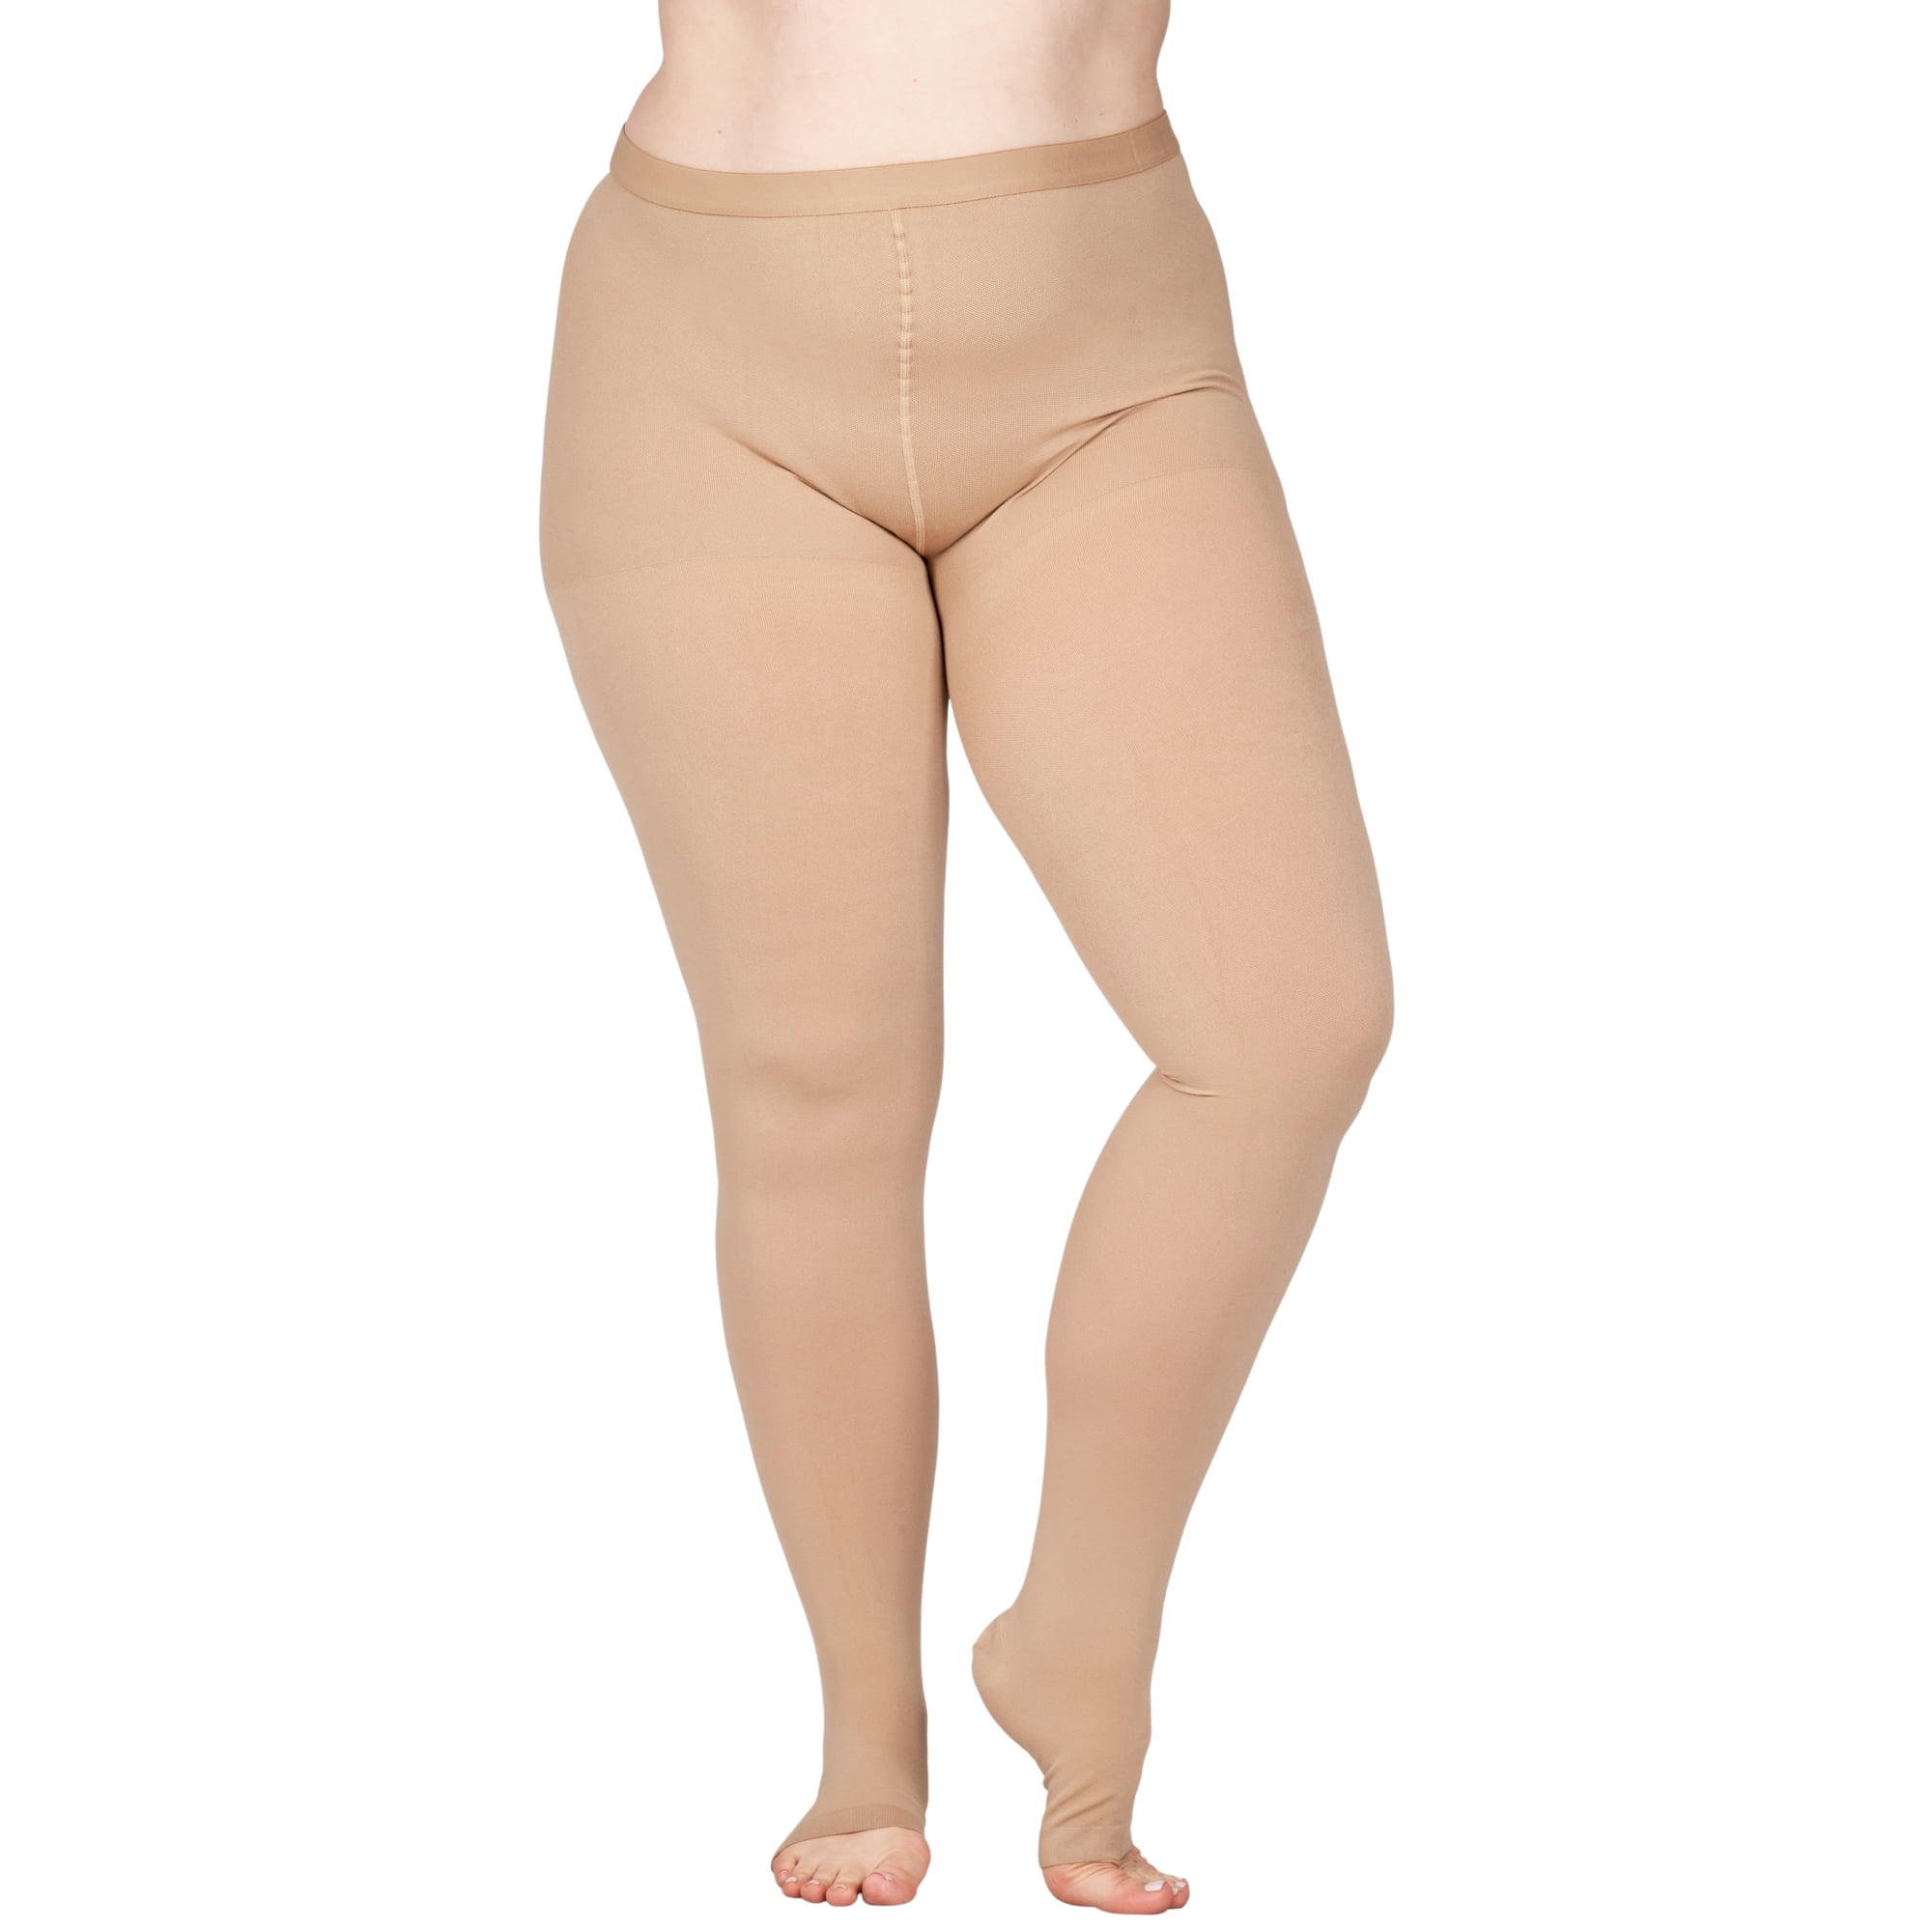  Opaque Compression Tights for Women 20-30mmHg - Graduated  Support Compression Stockings with Open Toe for Lymphedema, Diabetic,  Swelling, Arthritis - Beige, X-Large - A214BE4 : Health & Household